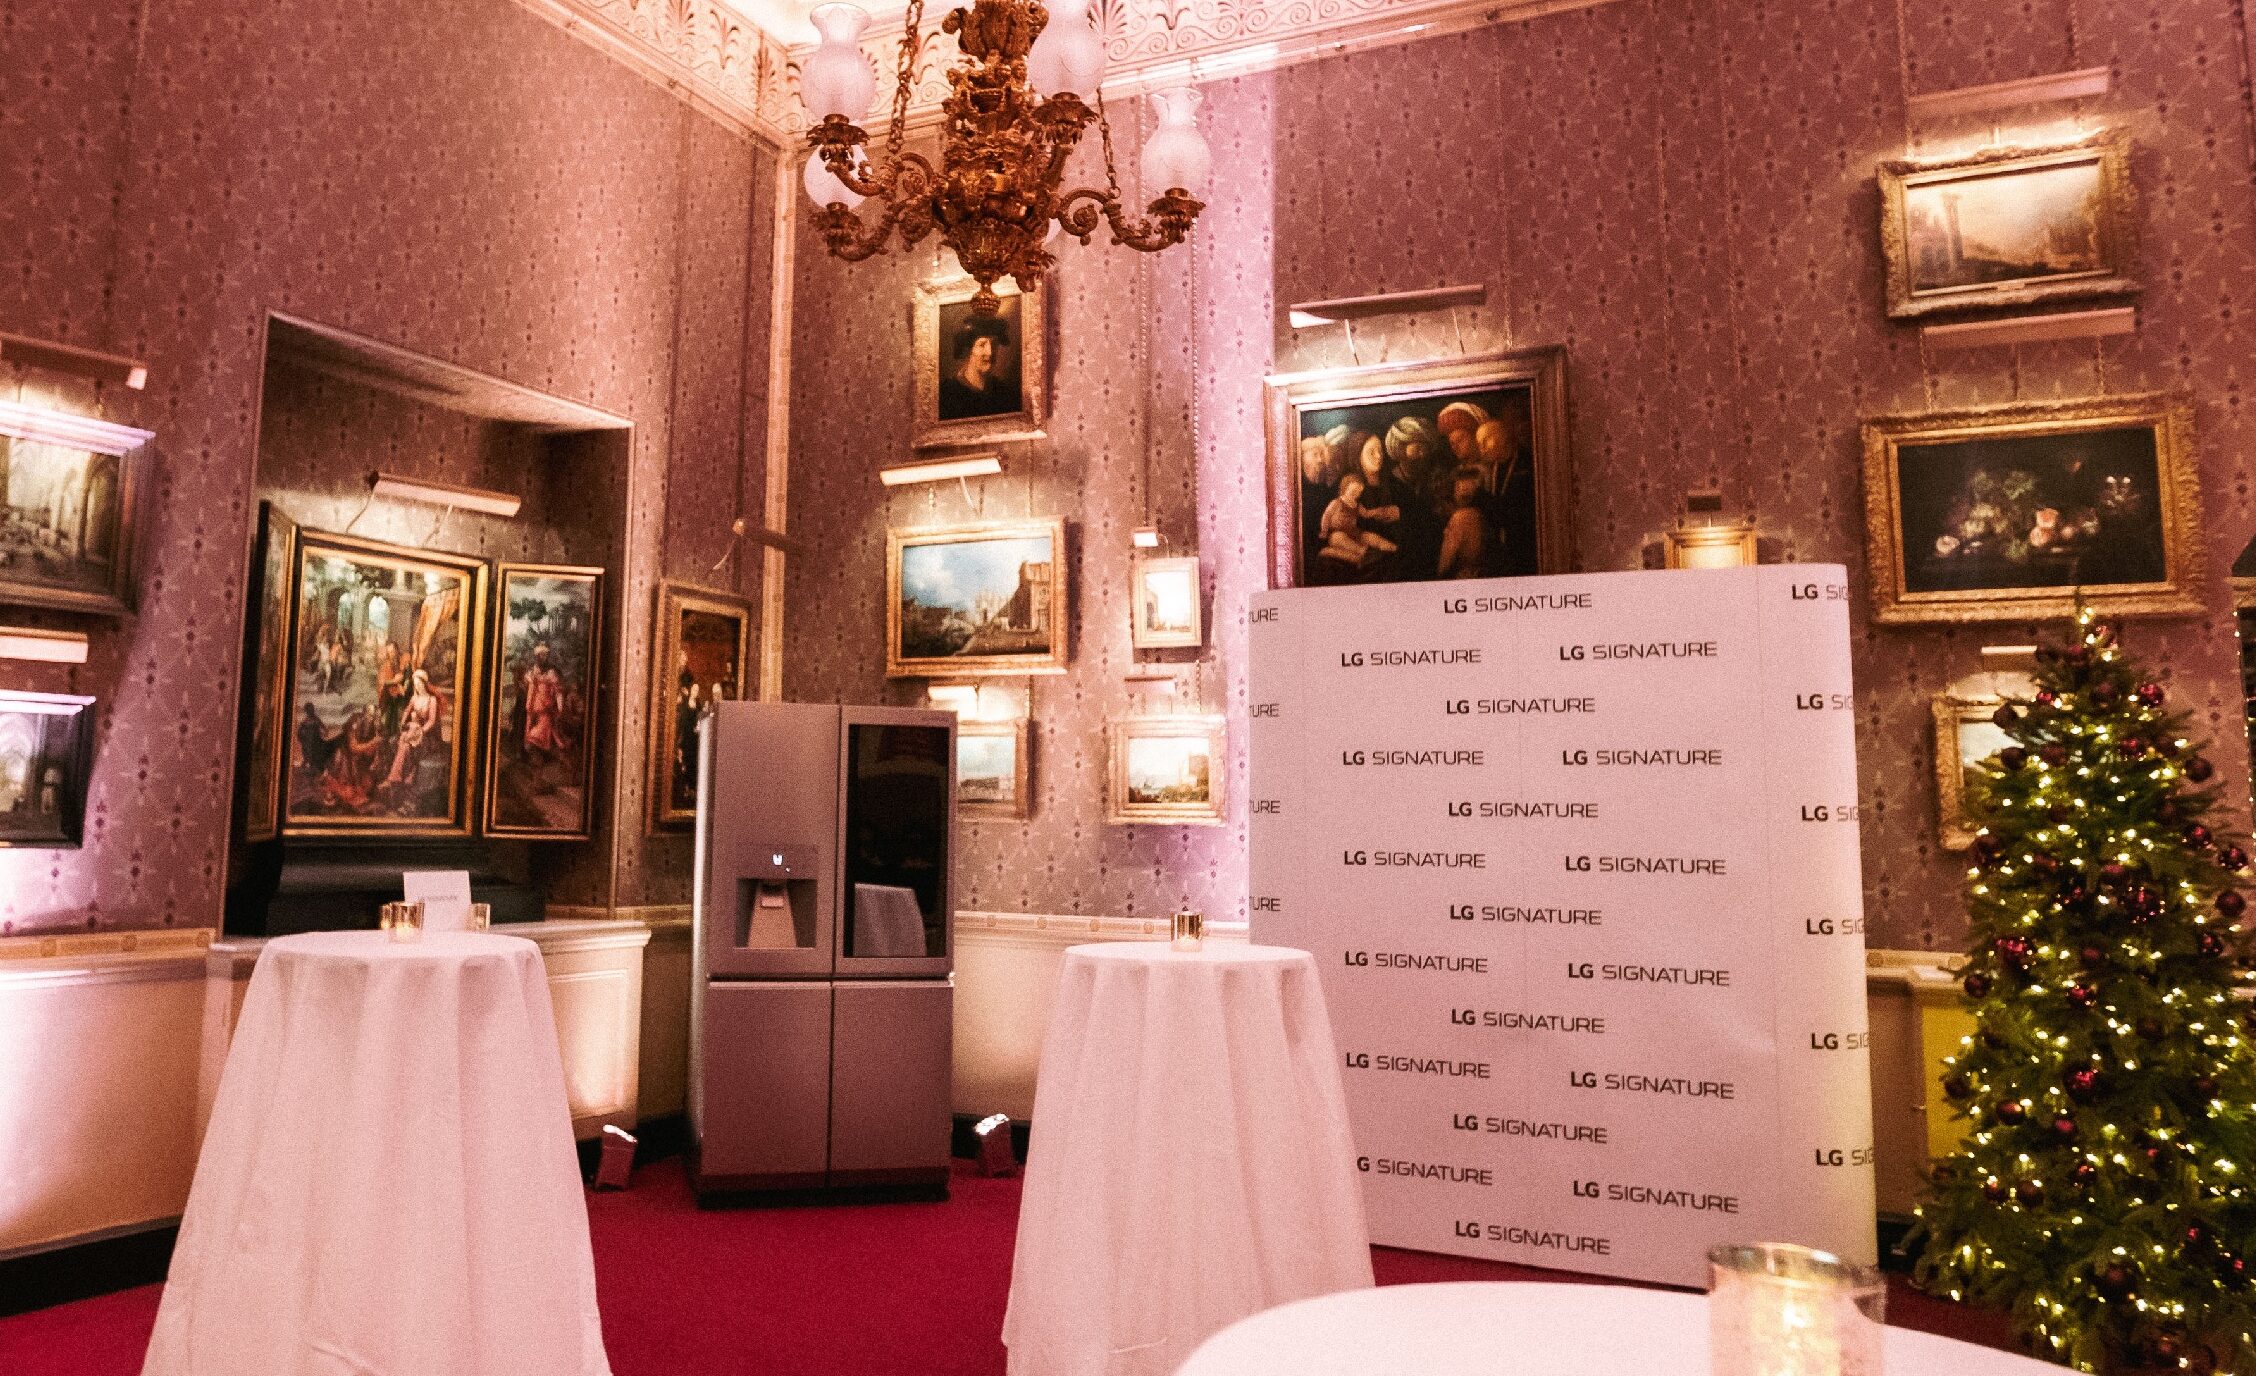 The Prince of Wales room of the Royal Albert Hall filled with LG SIGNATURE's luxurious products and beautiful pictures for the event